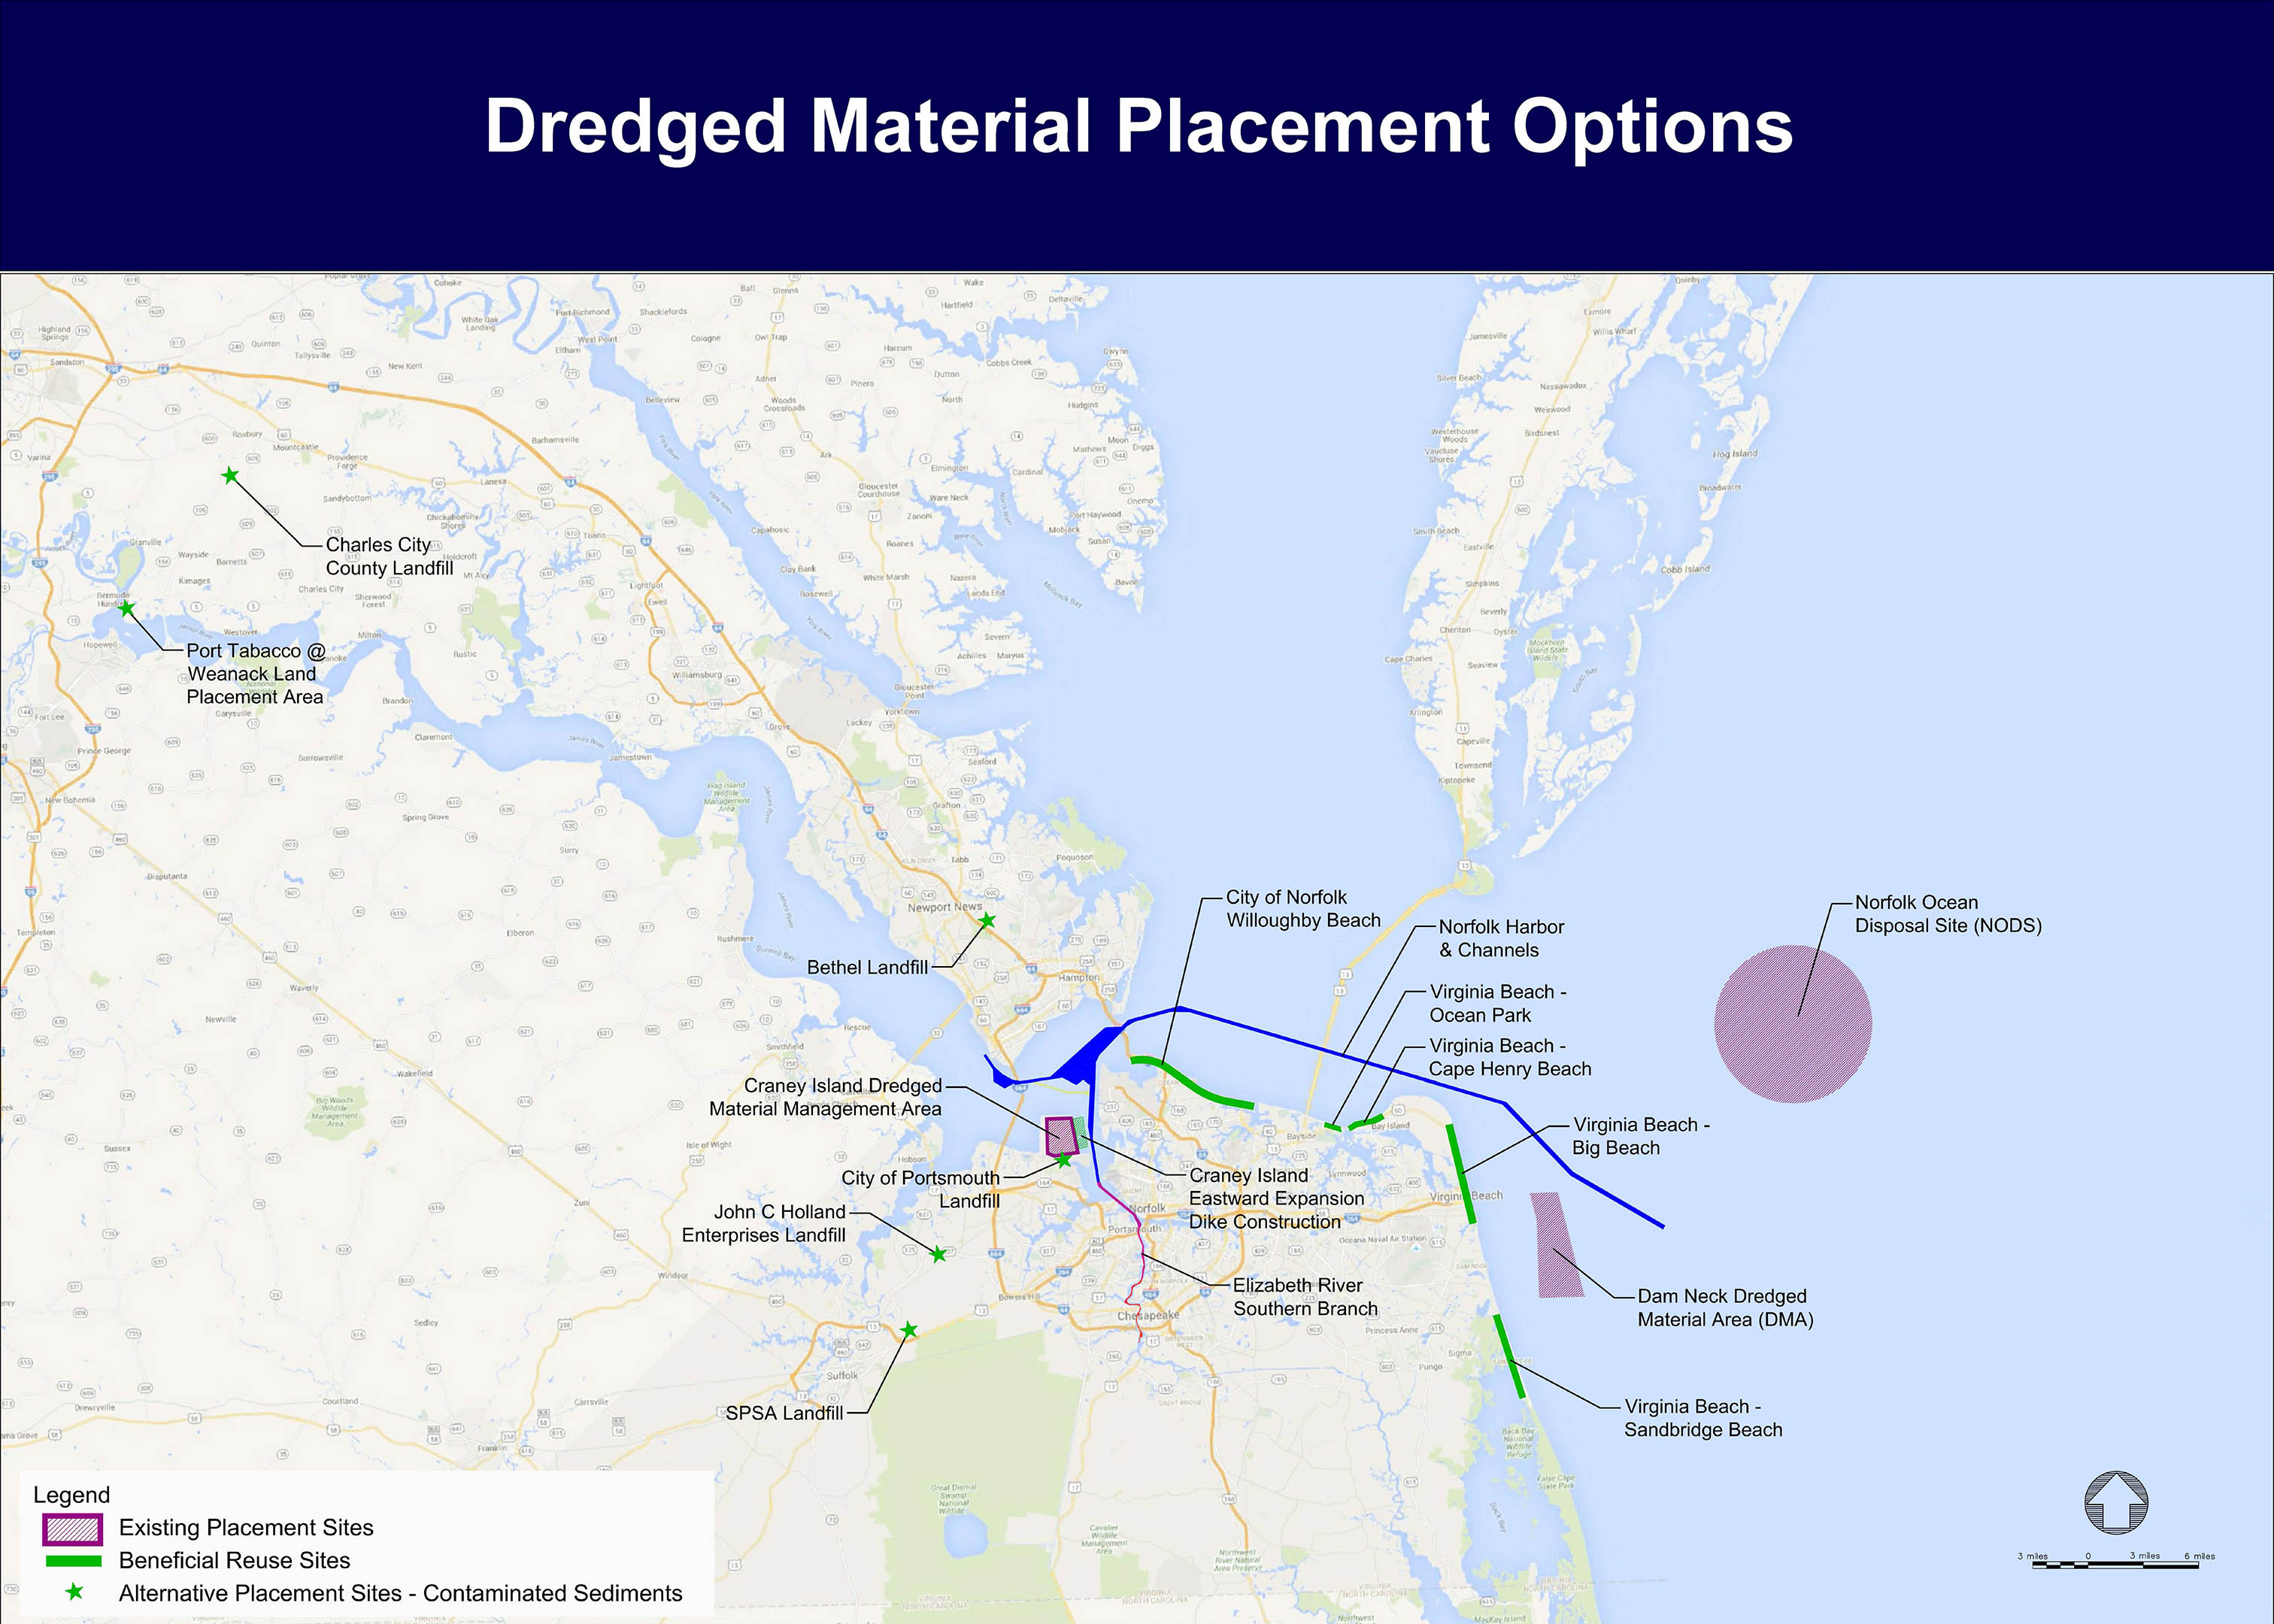 Link to Dredged Material Placement Options Graphic